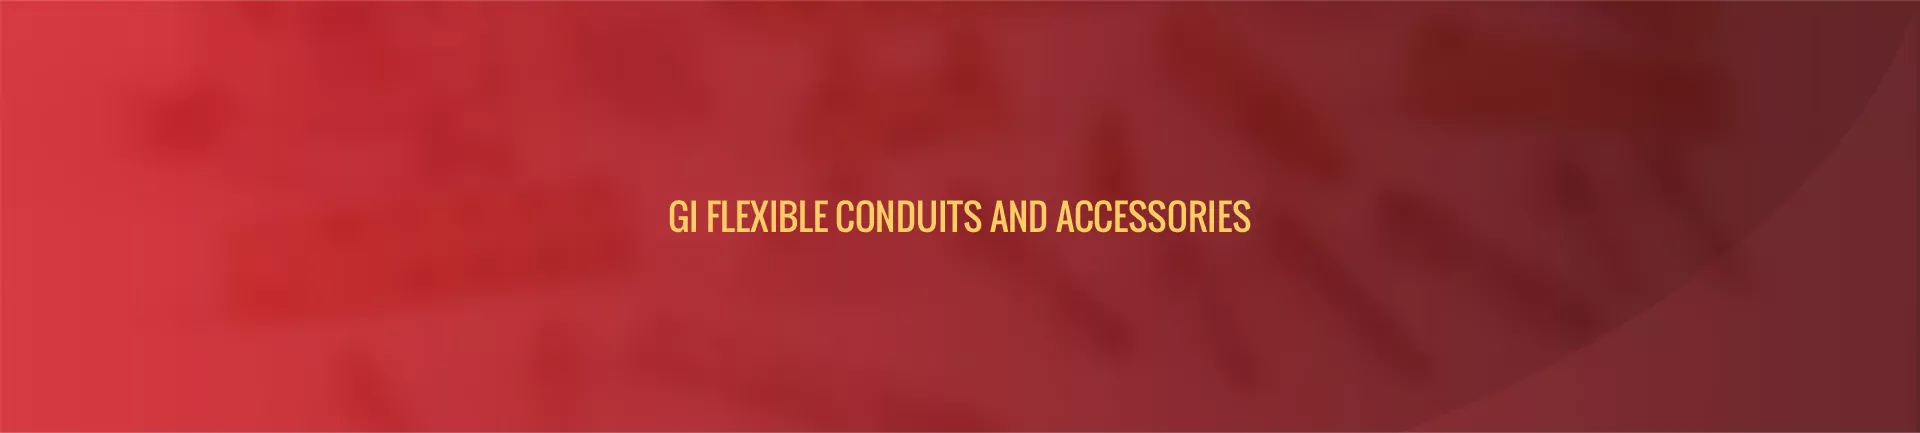 gi-flexible-conduits-and-accessories-banner